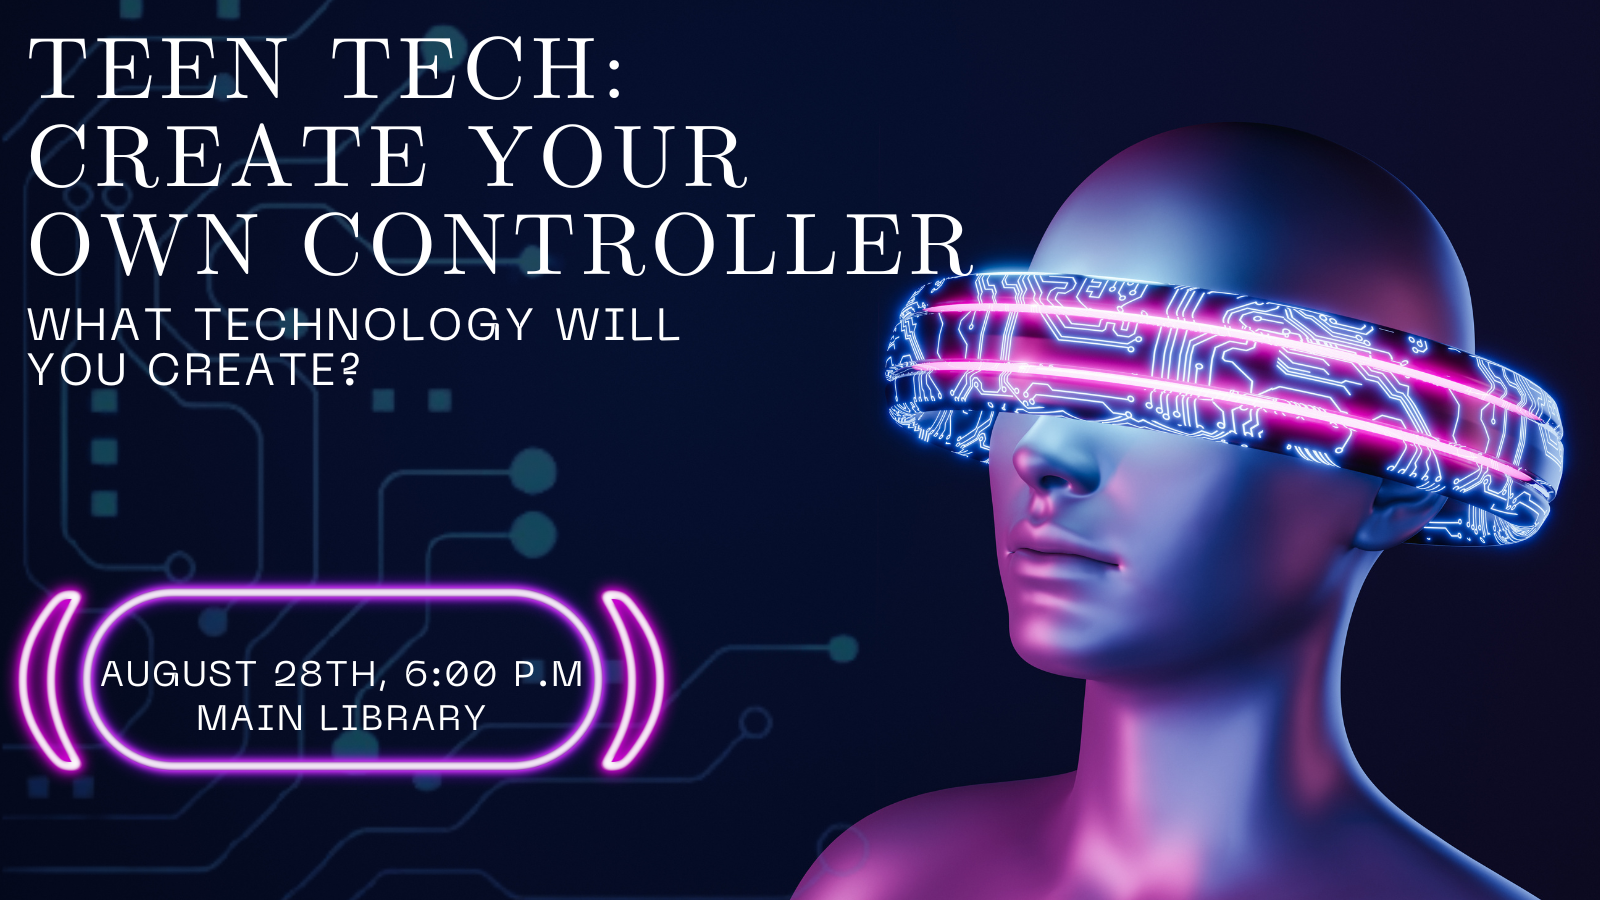 Futuristic looking person with a halo like ring around their eyes and head, with words that read: " Teen Tech: Create Your Own Controller. What will you create? August 28th 6:00 P.M. Main Library